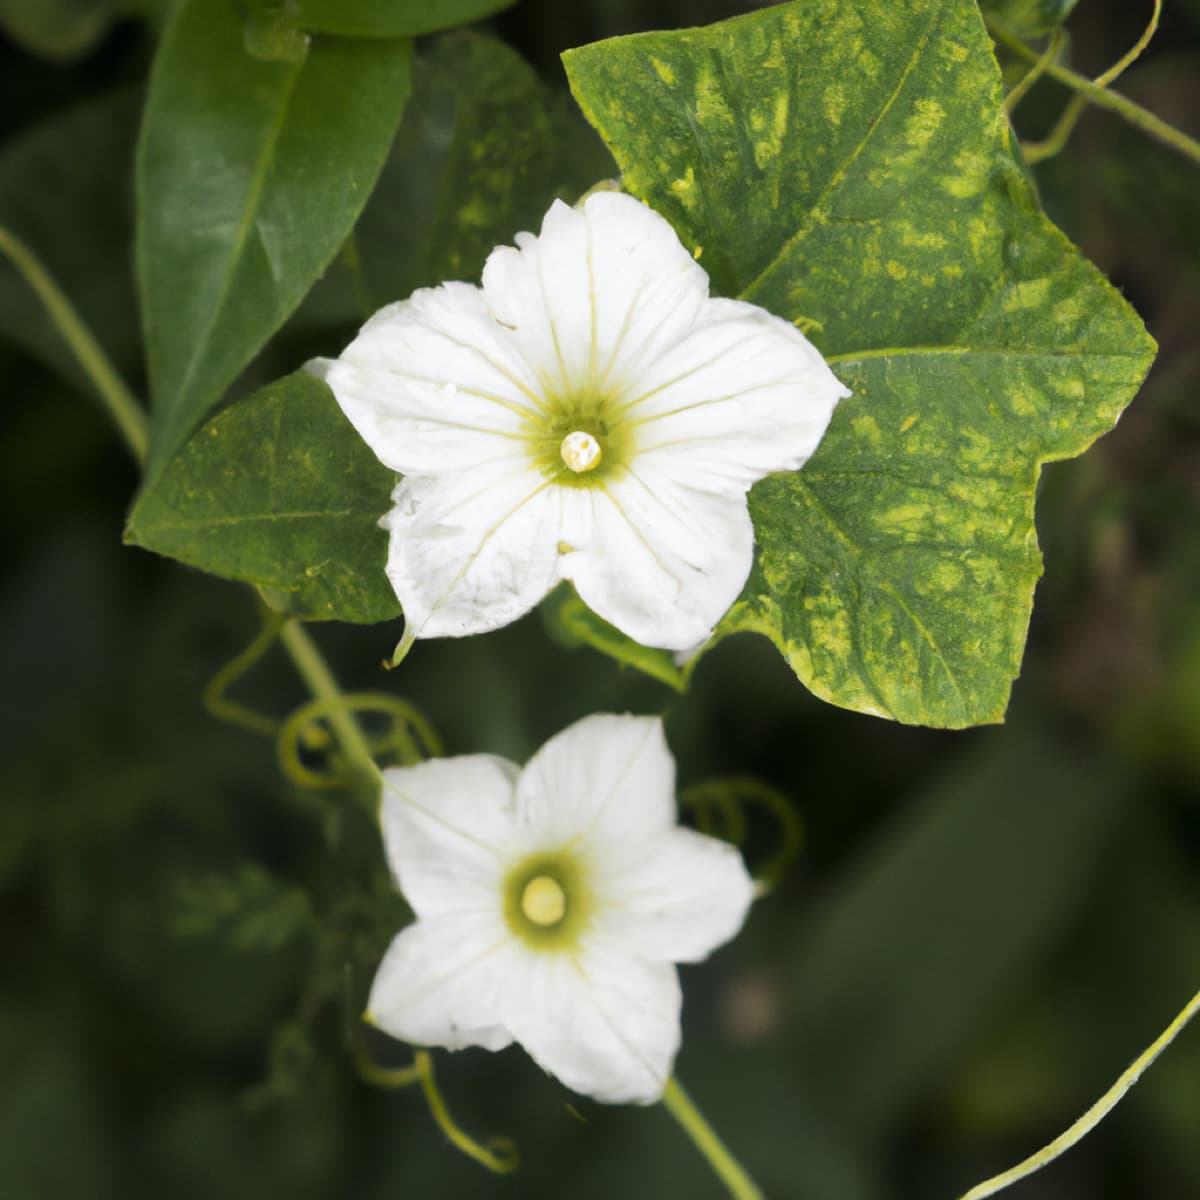 How to Pollinate Snake Gourd Flowers